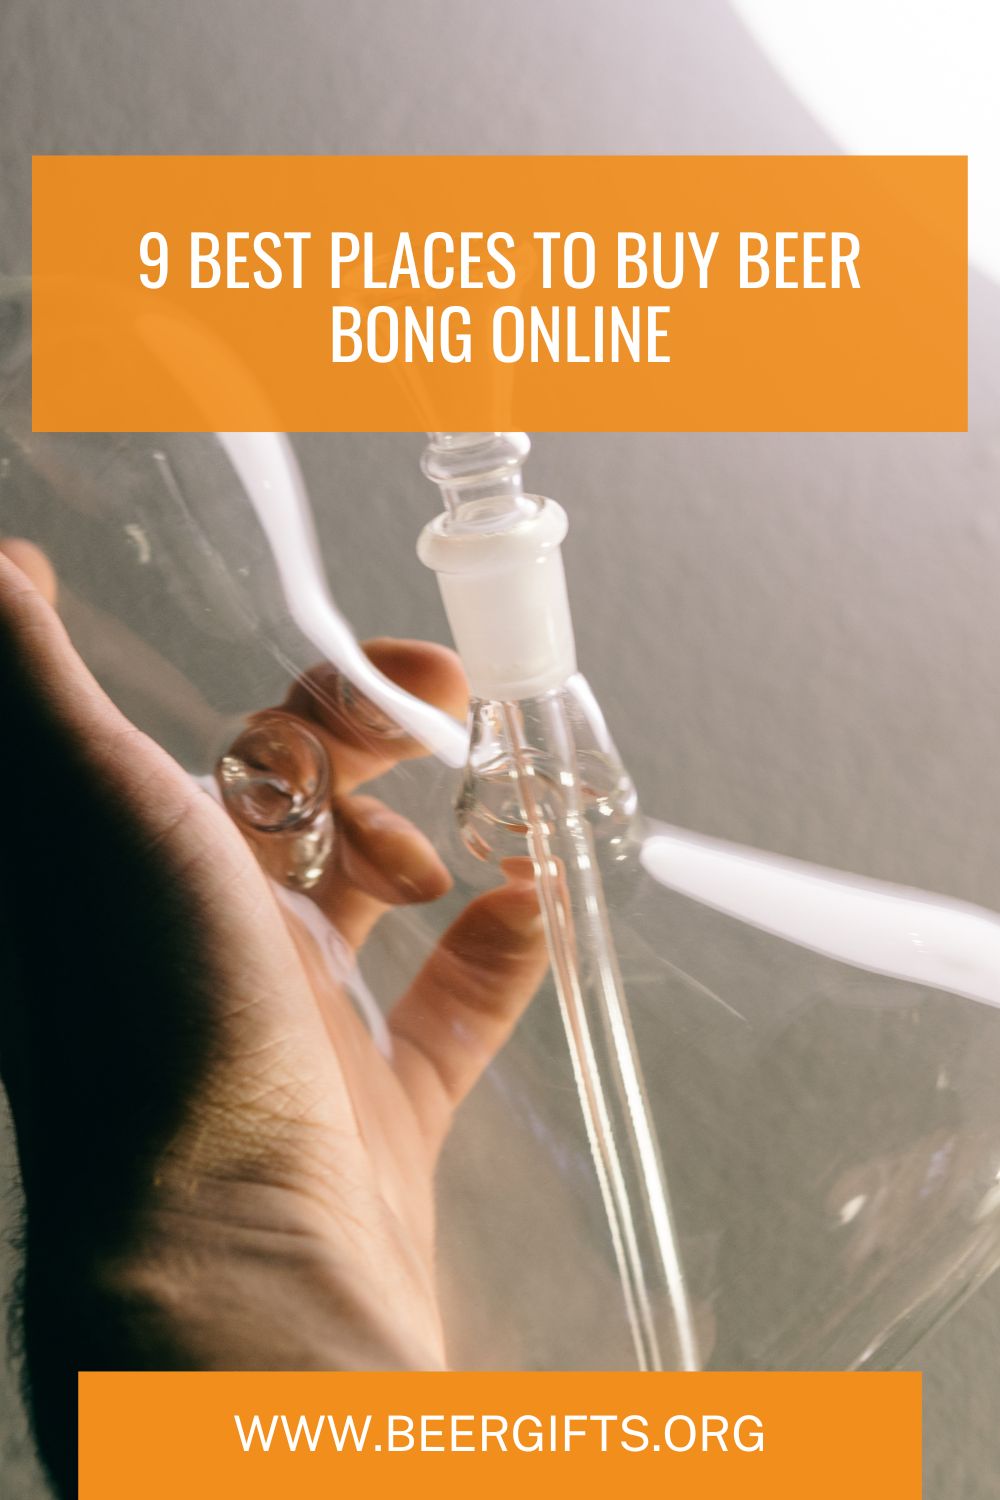 9 Best Places to Buy Beer Bong Online2